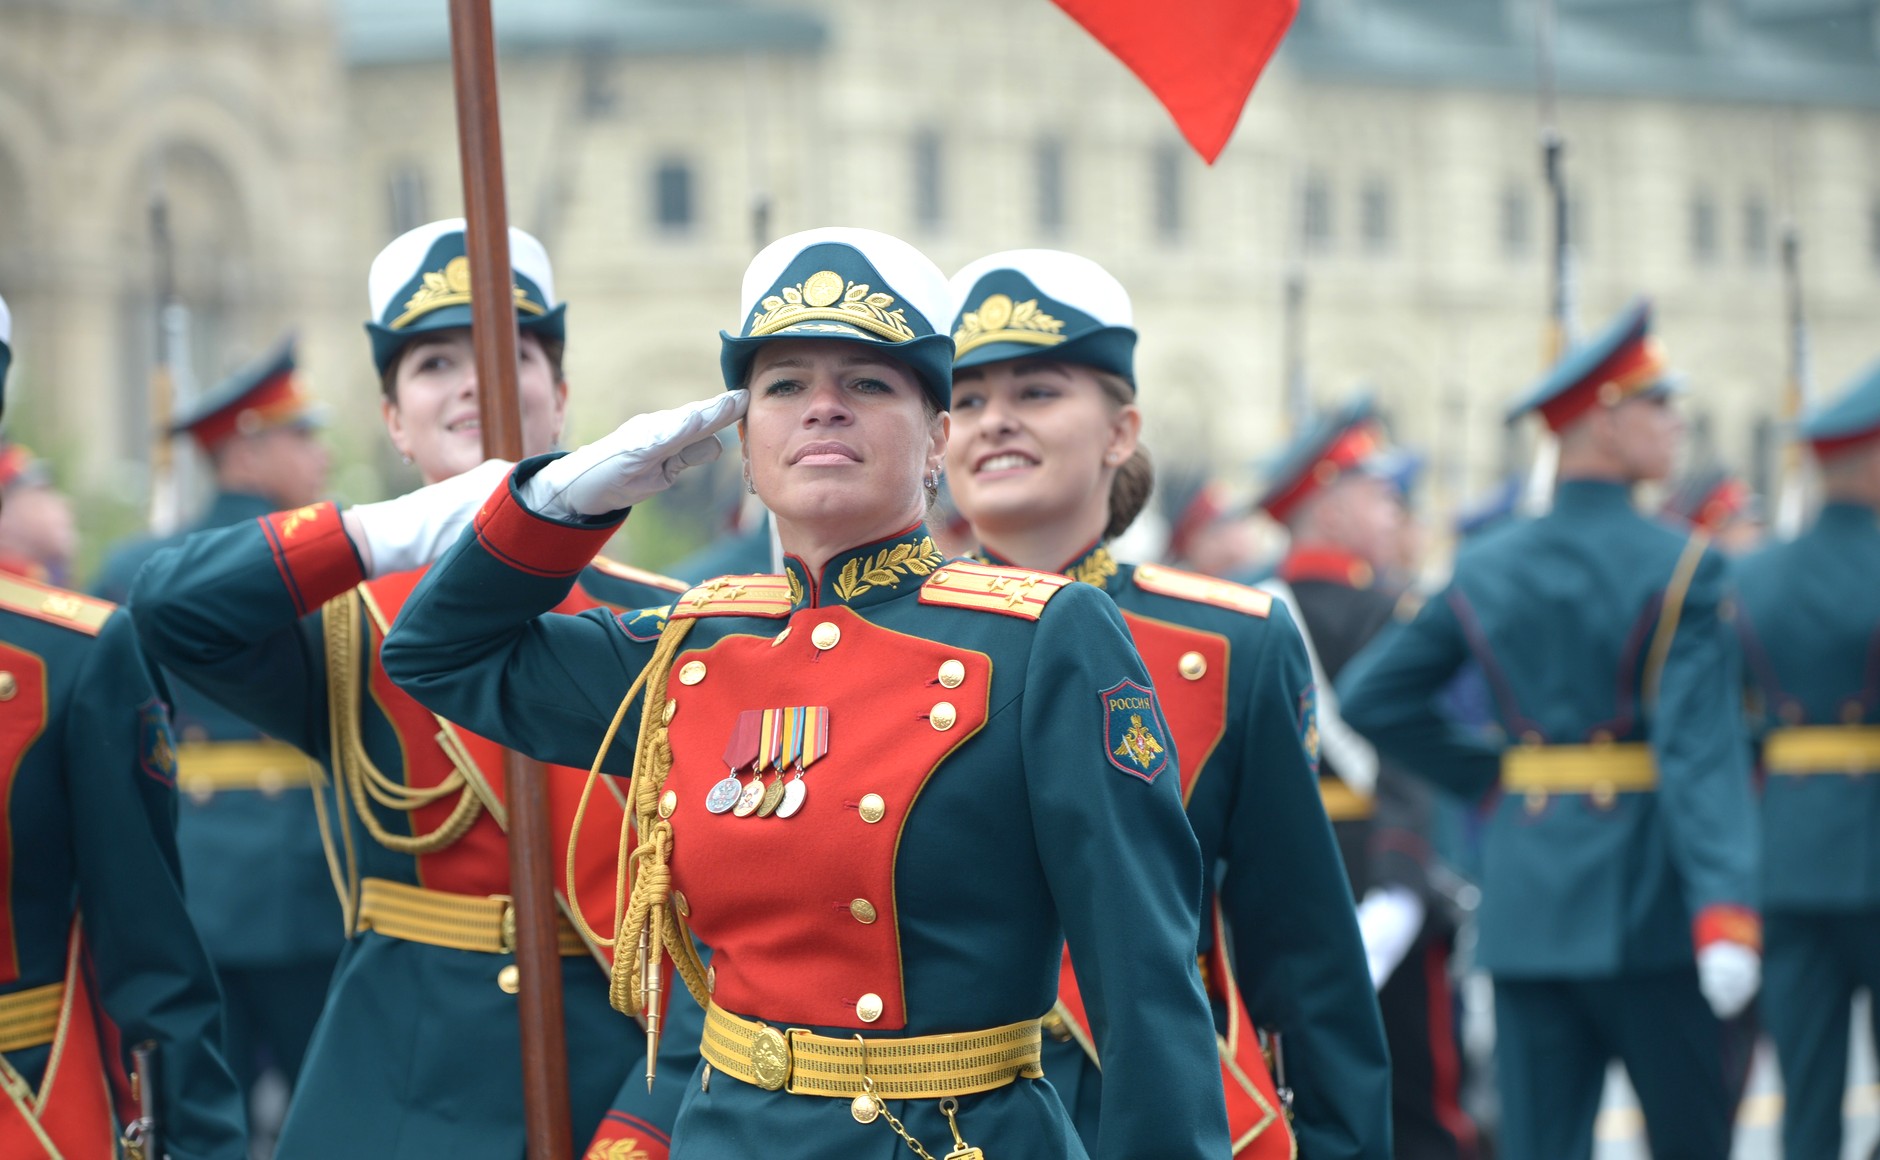 Women in the military in Europe picture